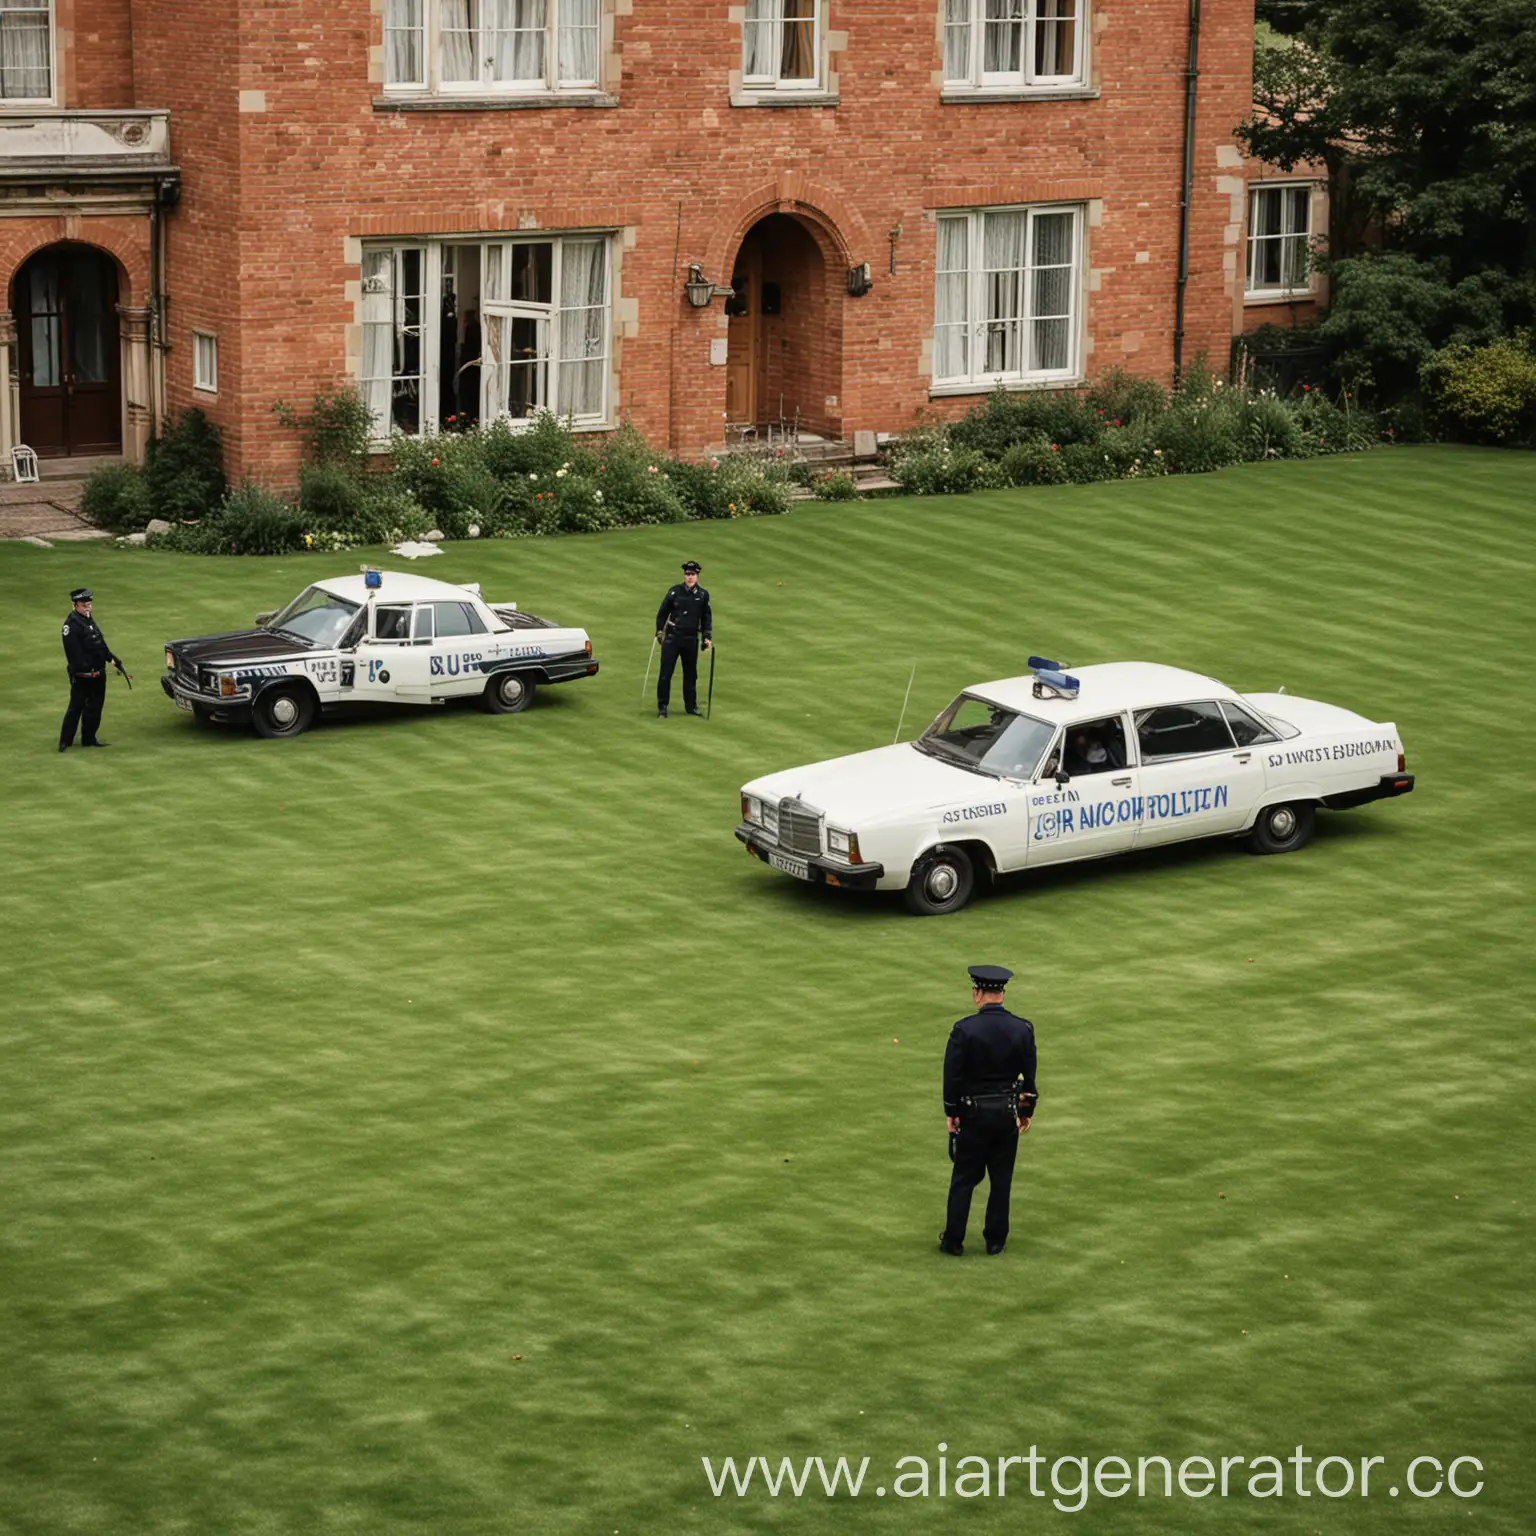 Police-Car-Parked-on-Green-Lawn